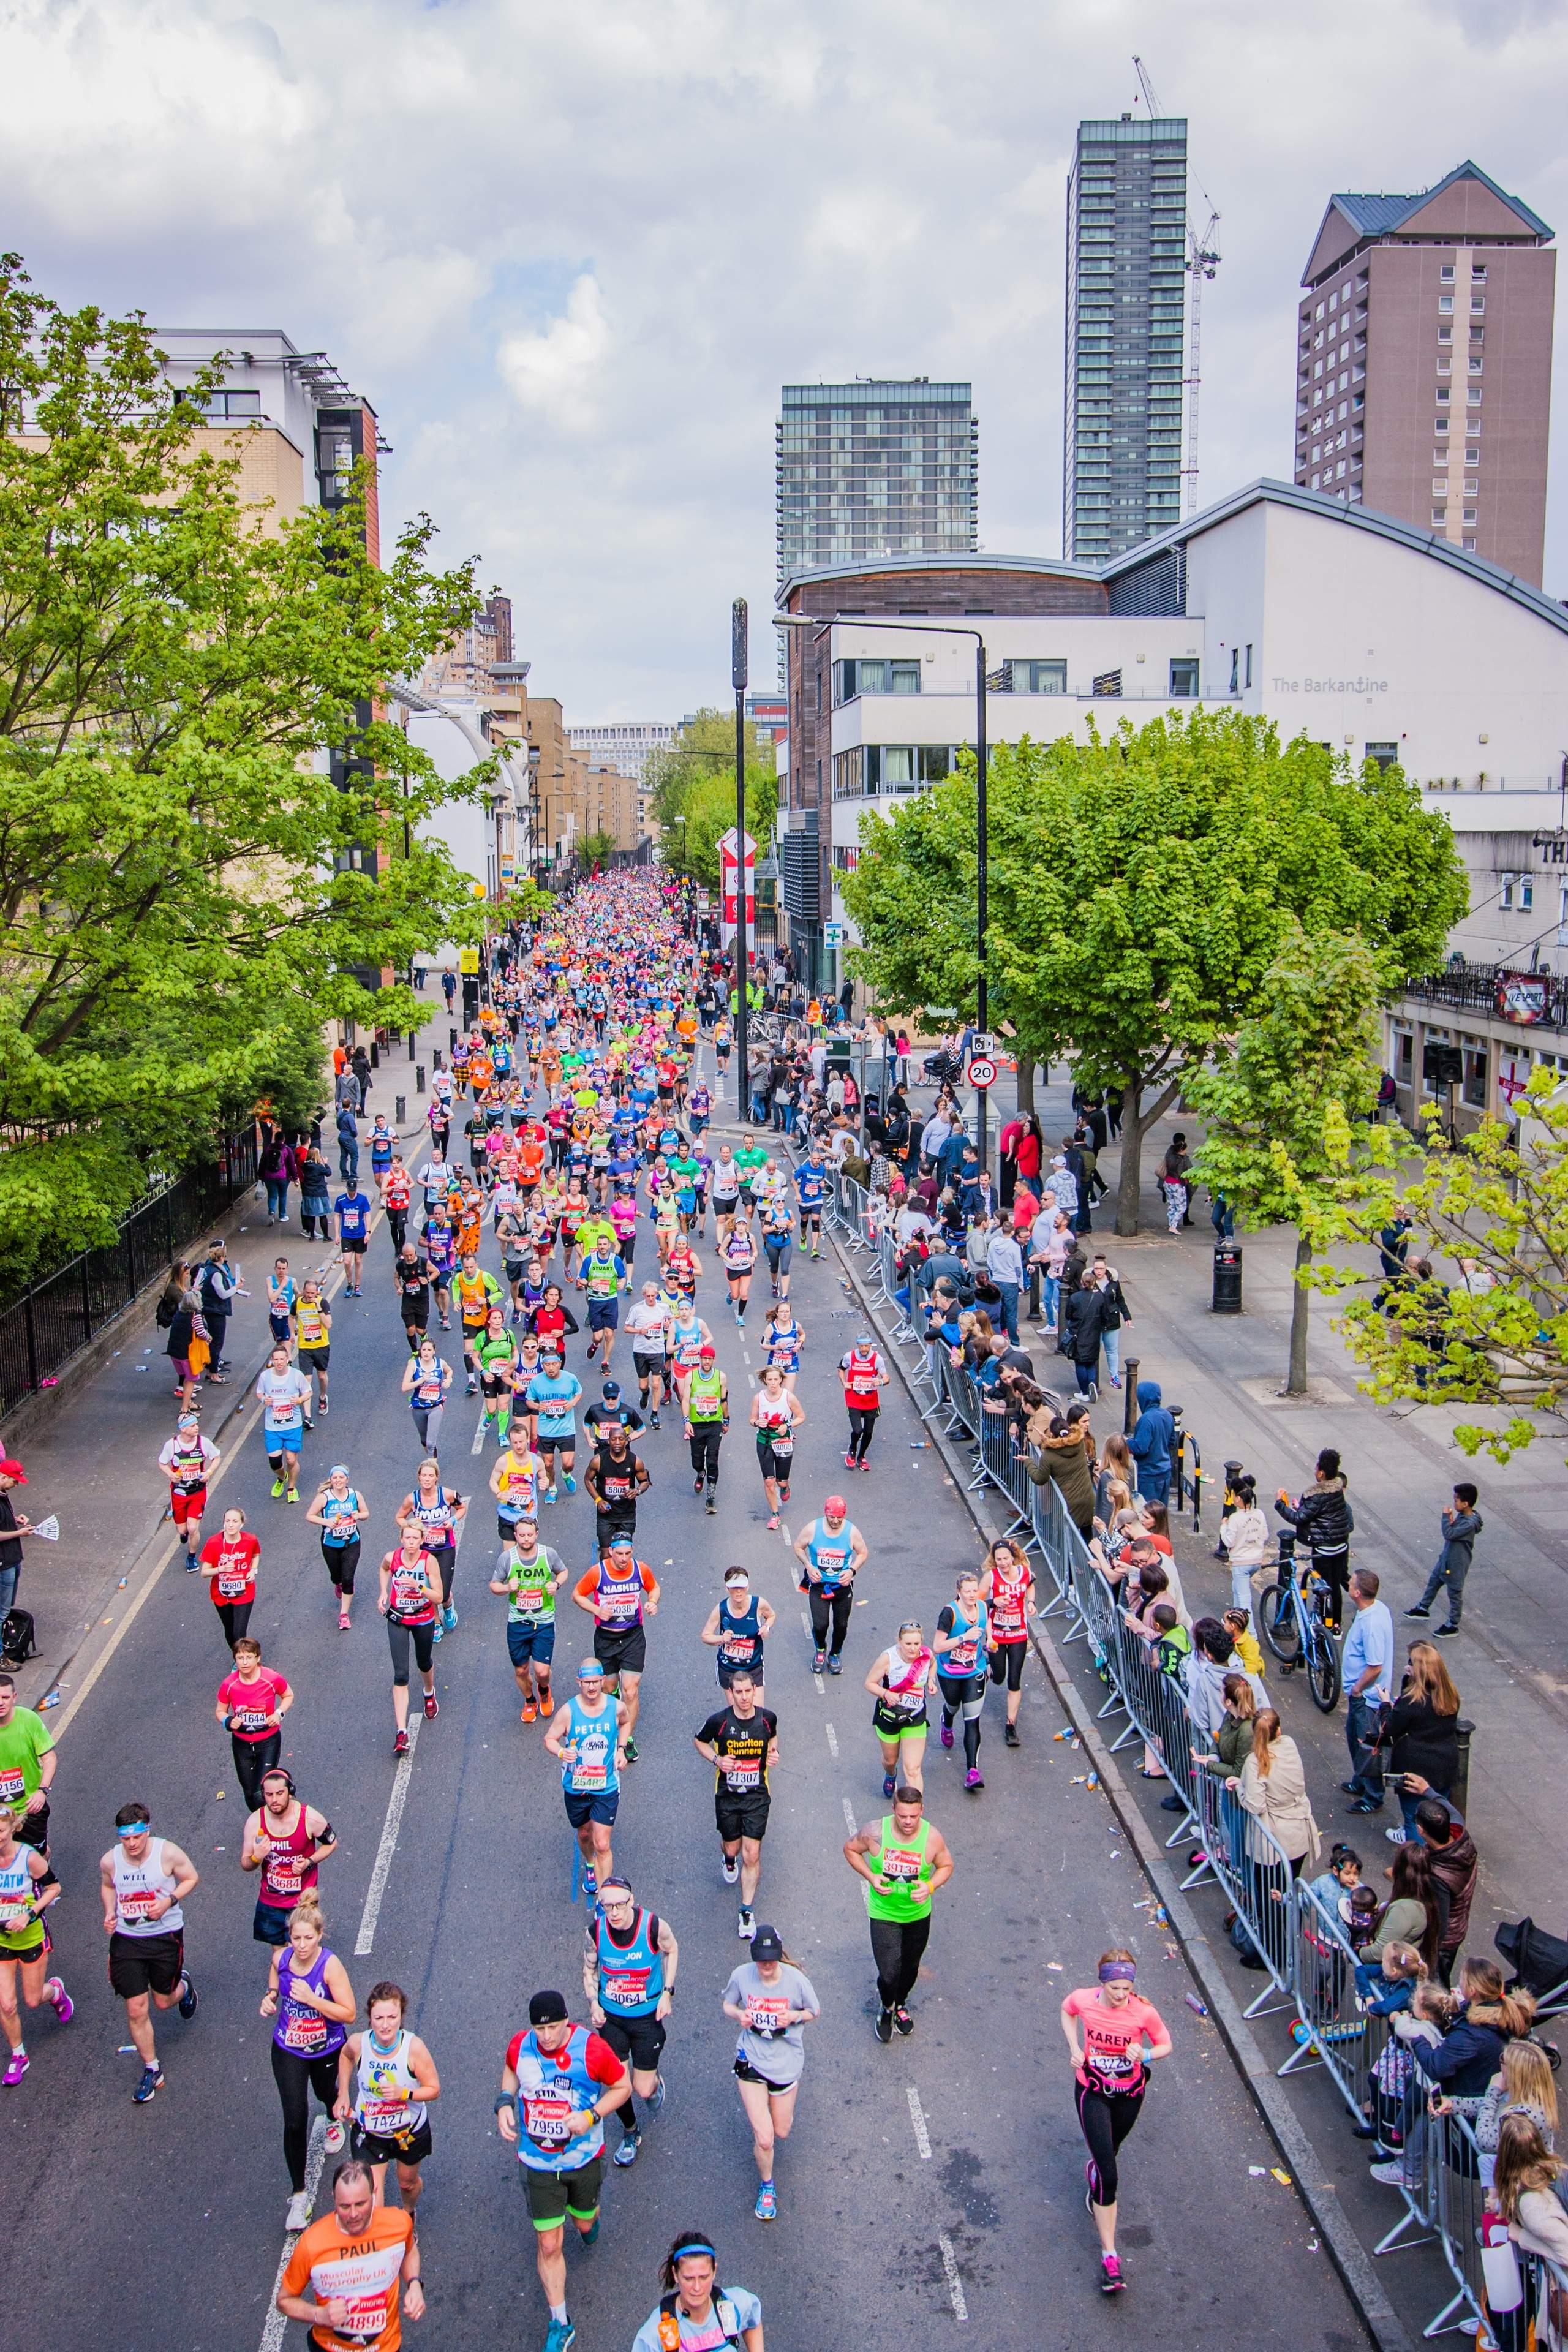 Runners on the course of 2017 London Marathon!